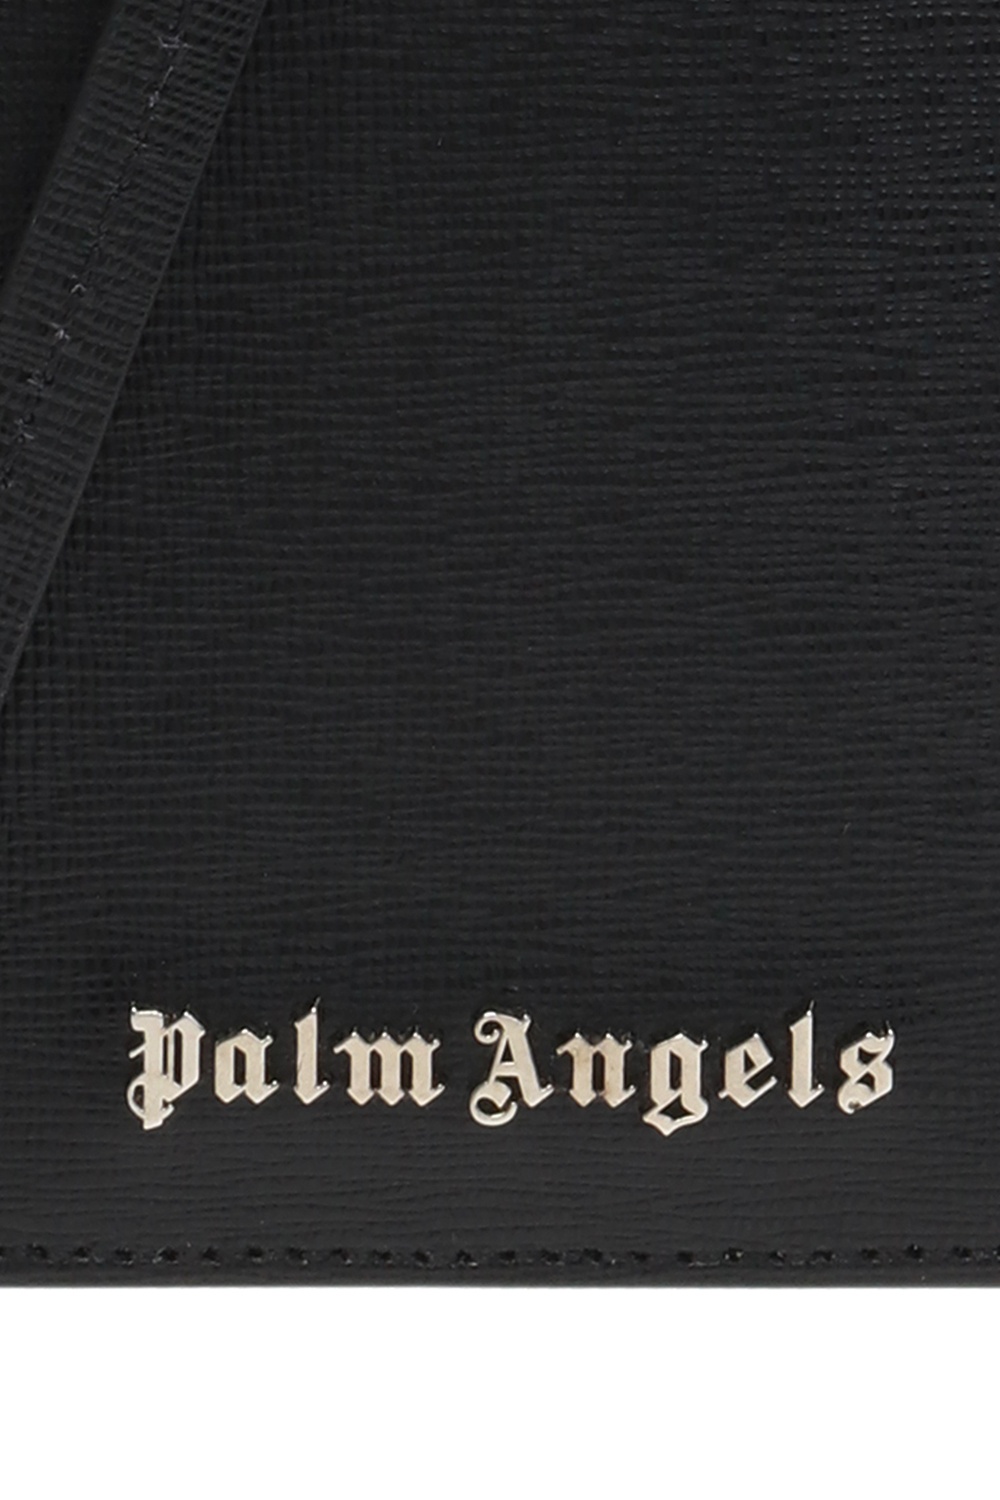 Palm Angels Glasses case with logo